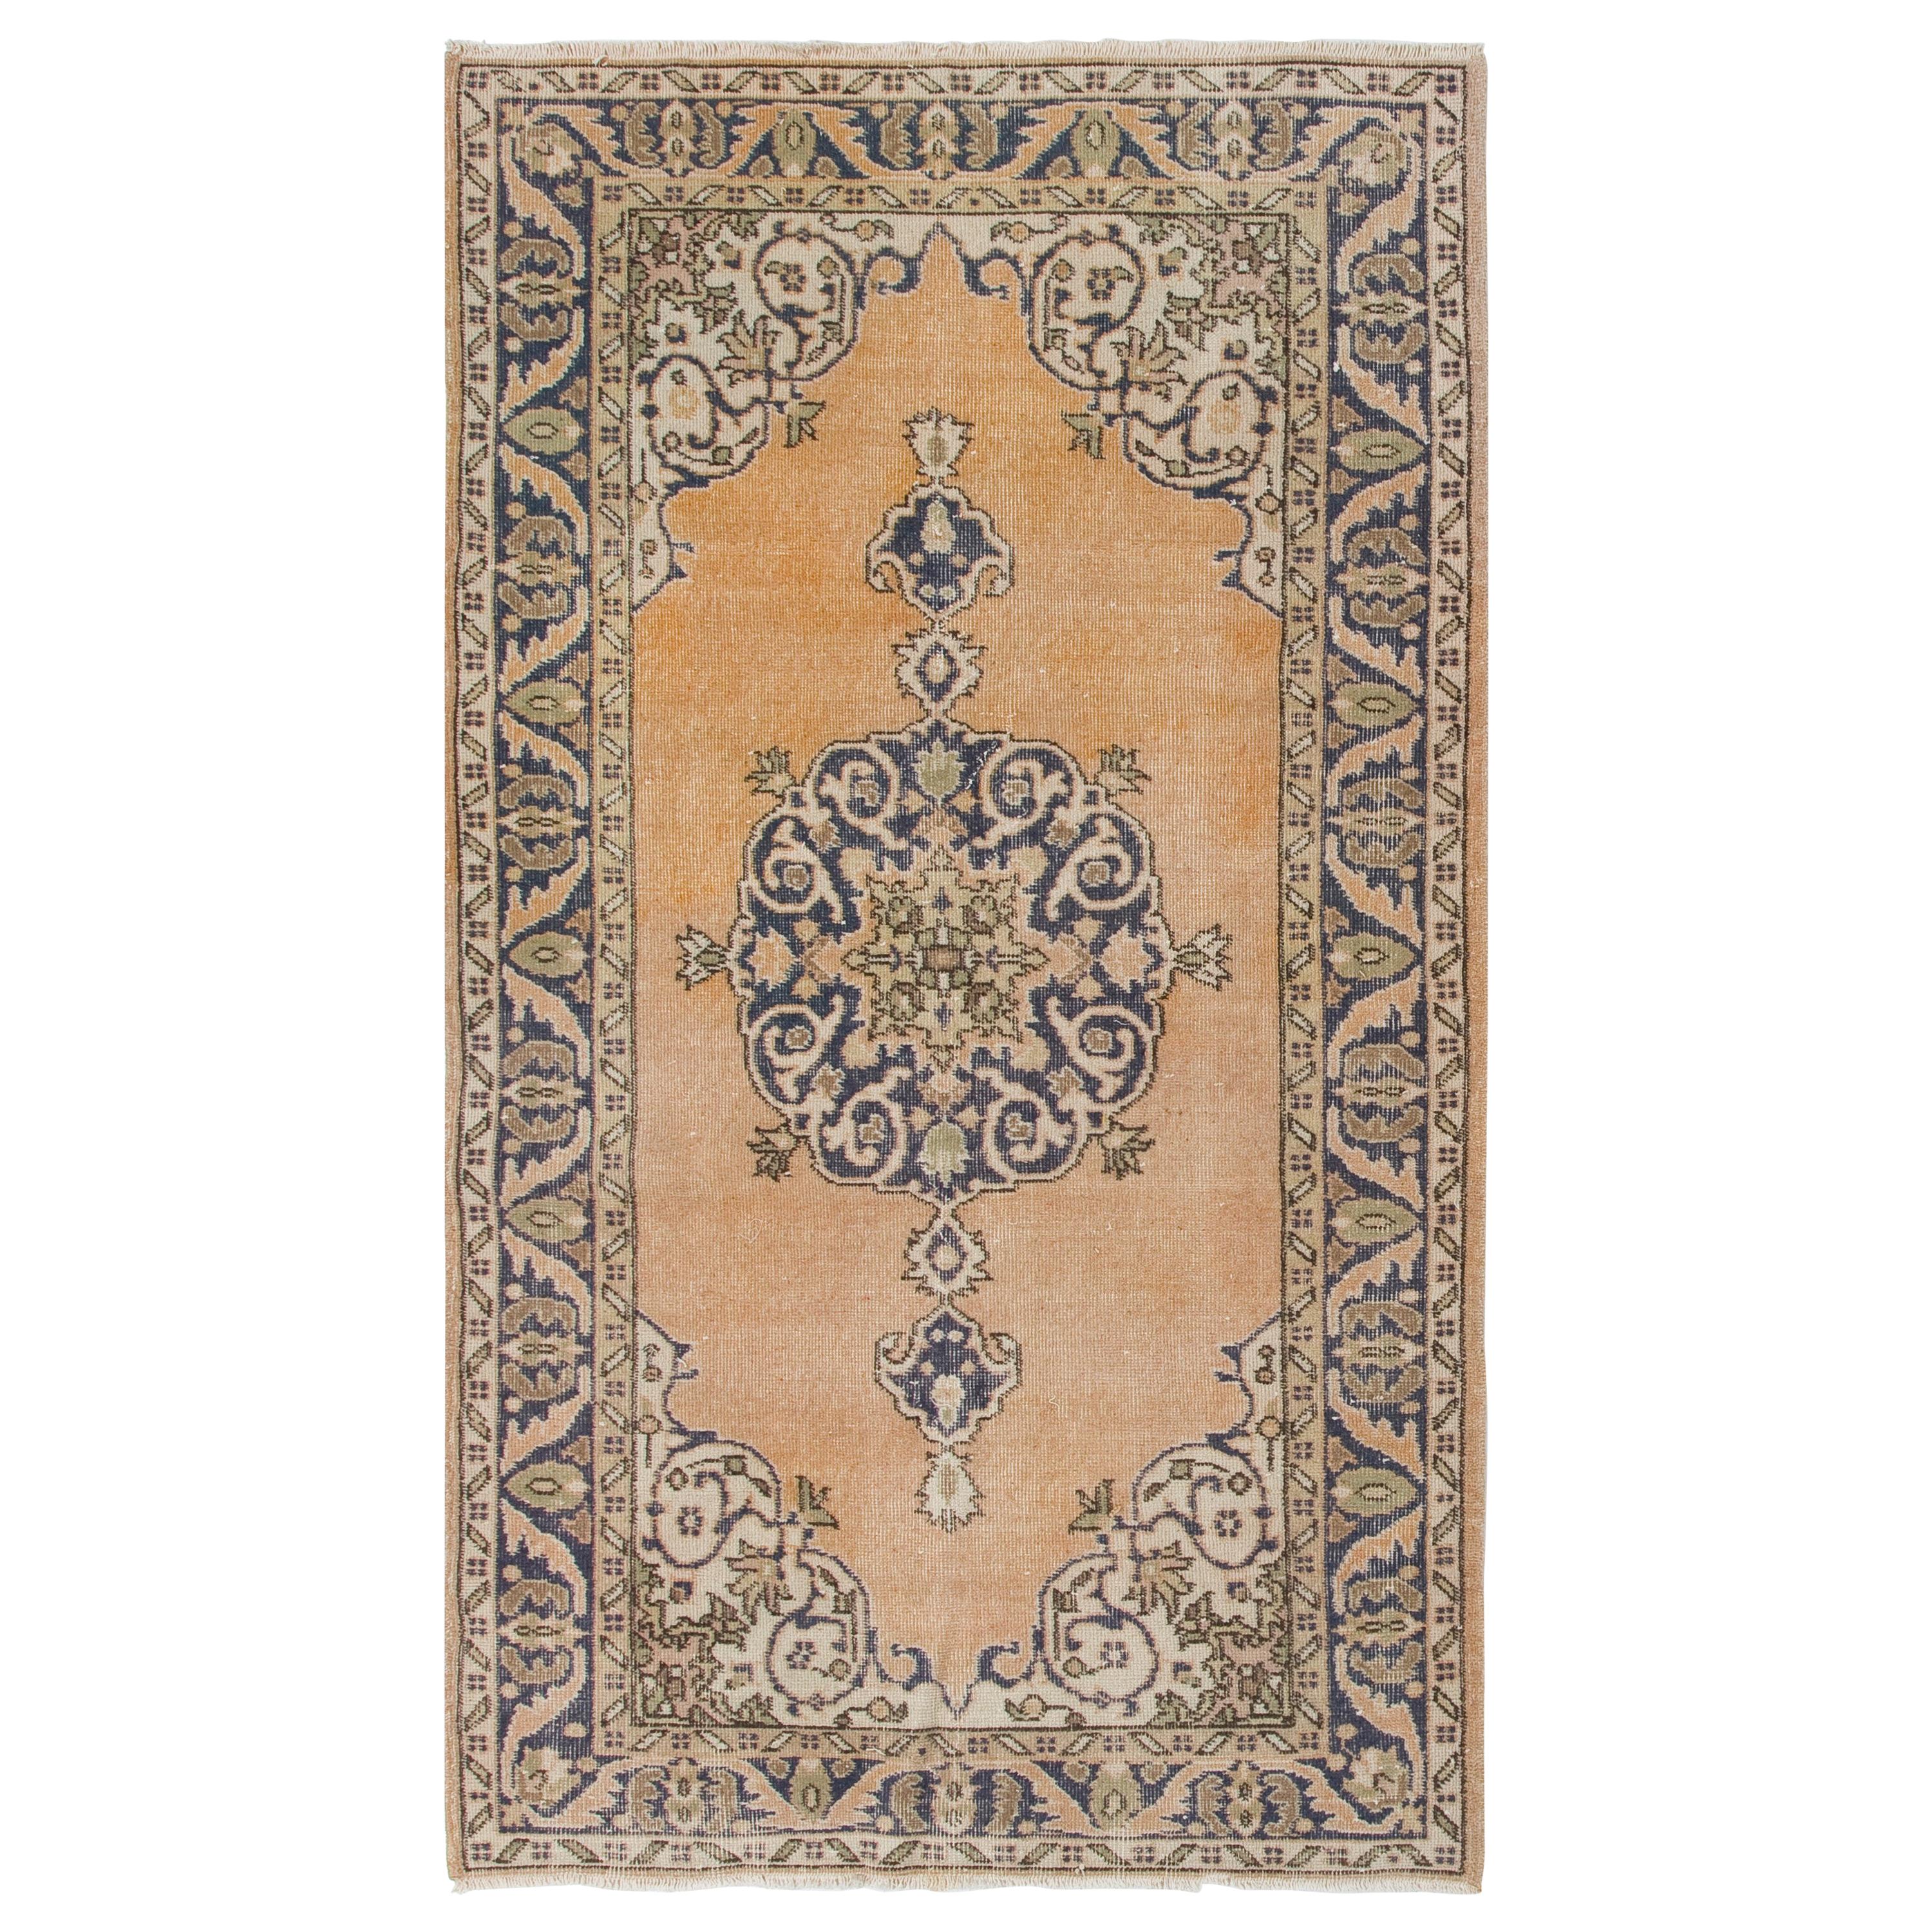 4x7 ft Vintage Handmade Oushak Wool Rug with Medallion Design in Peace and Blue For Sale